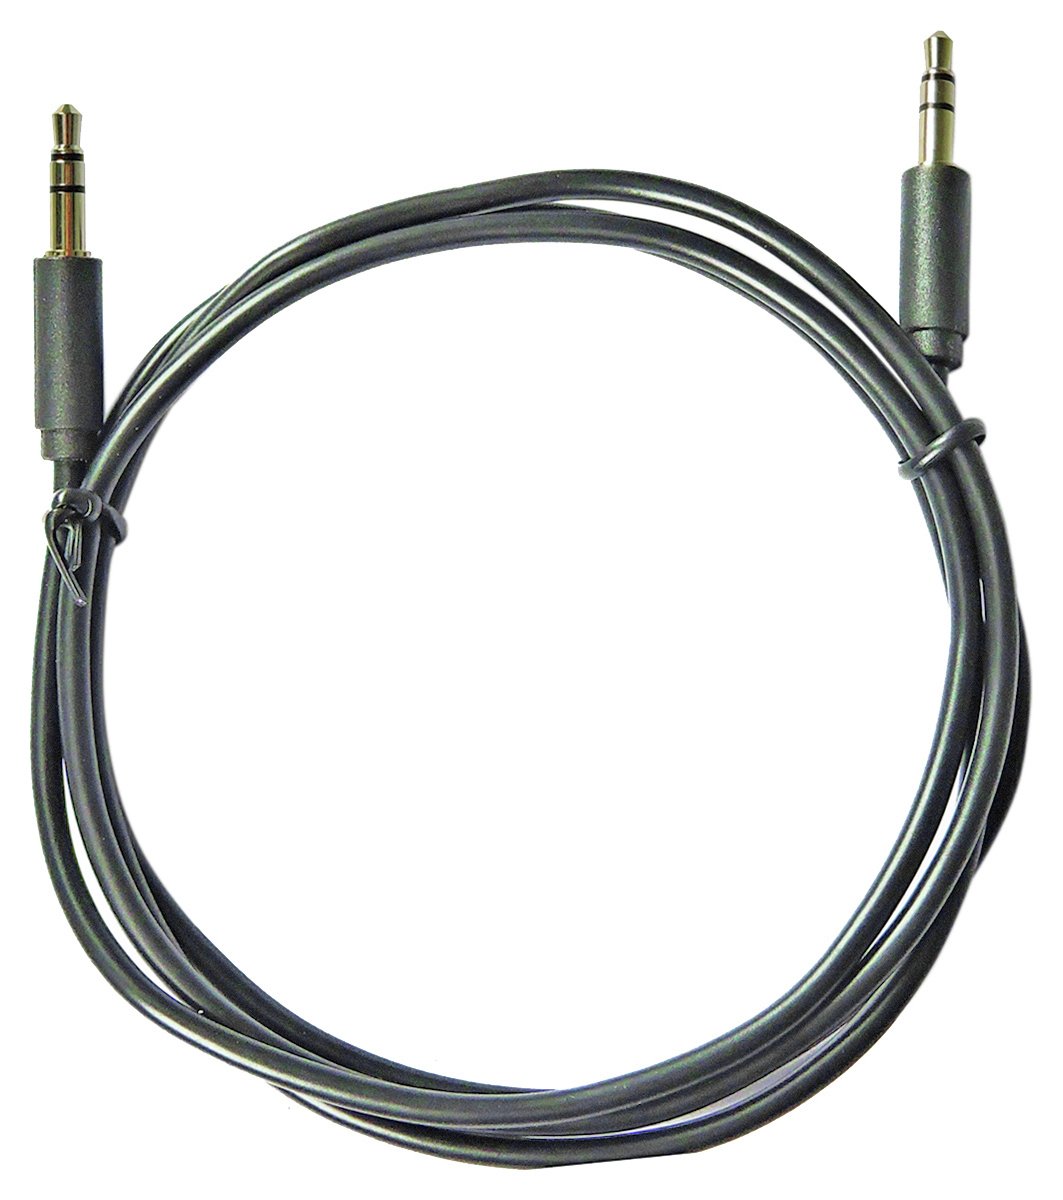 3.5mm Audio Cable Review